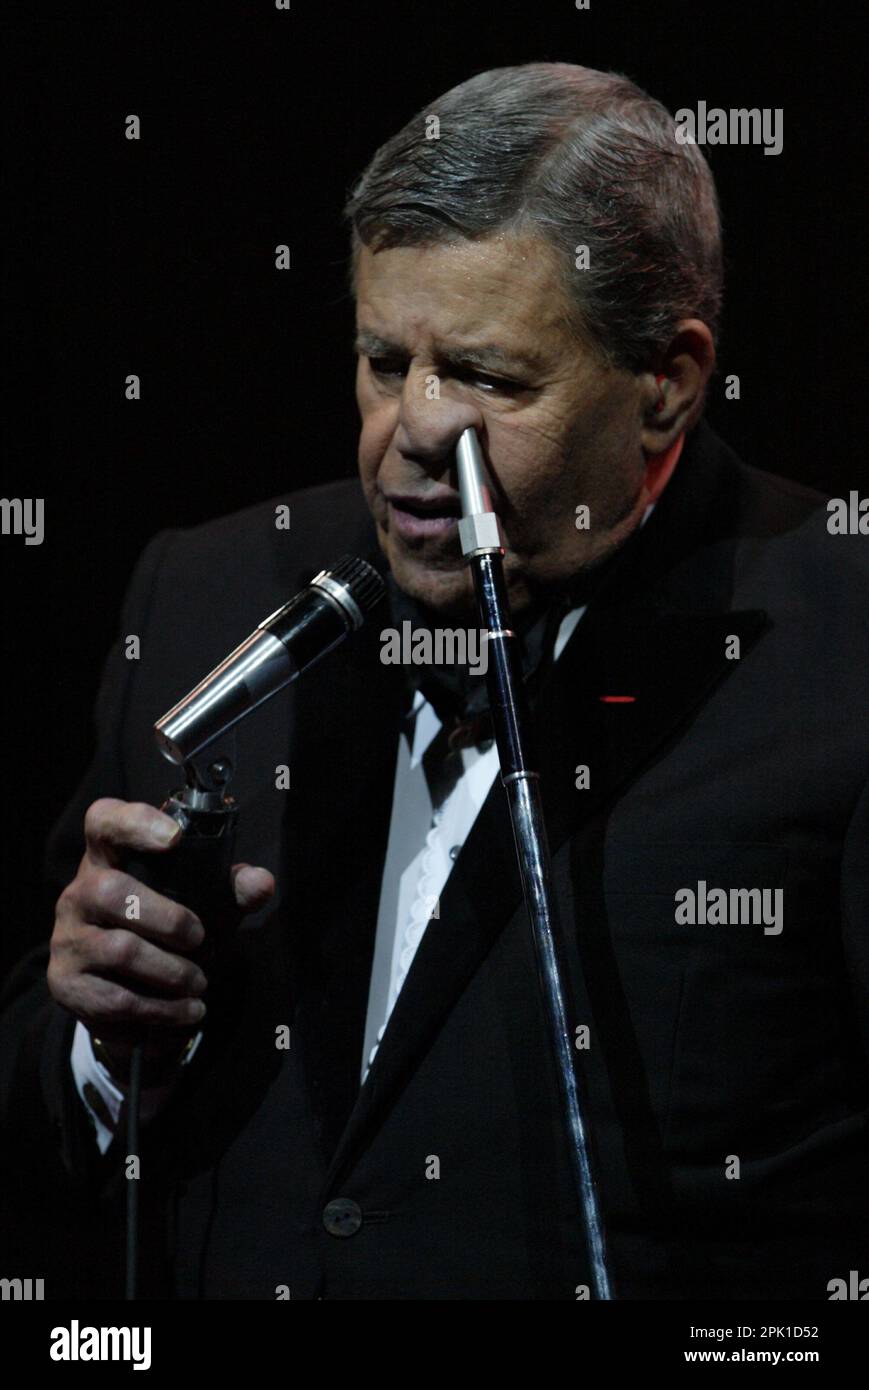 Jerry Lewis The 'Laugh For Life' comedy event raising funds for Muscular Dystrophy, held at the Enmore Theatre. Sydney, Australia - 21.09.09 Stock Photo